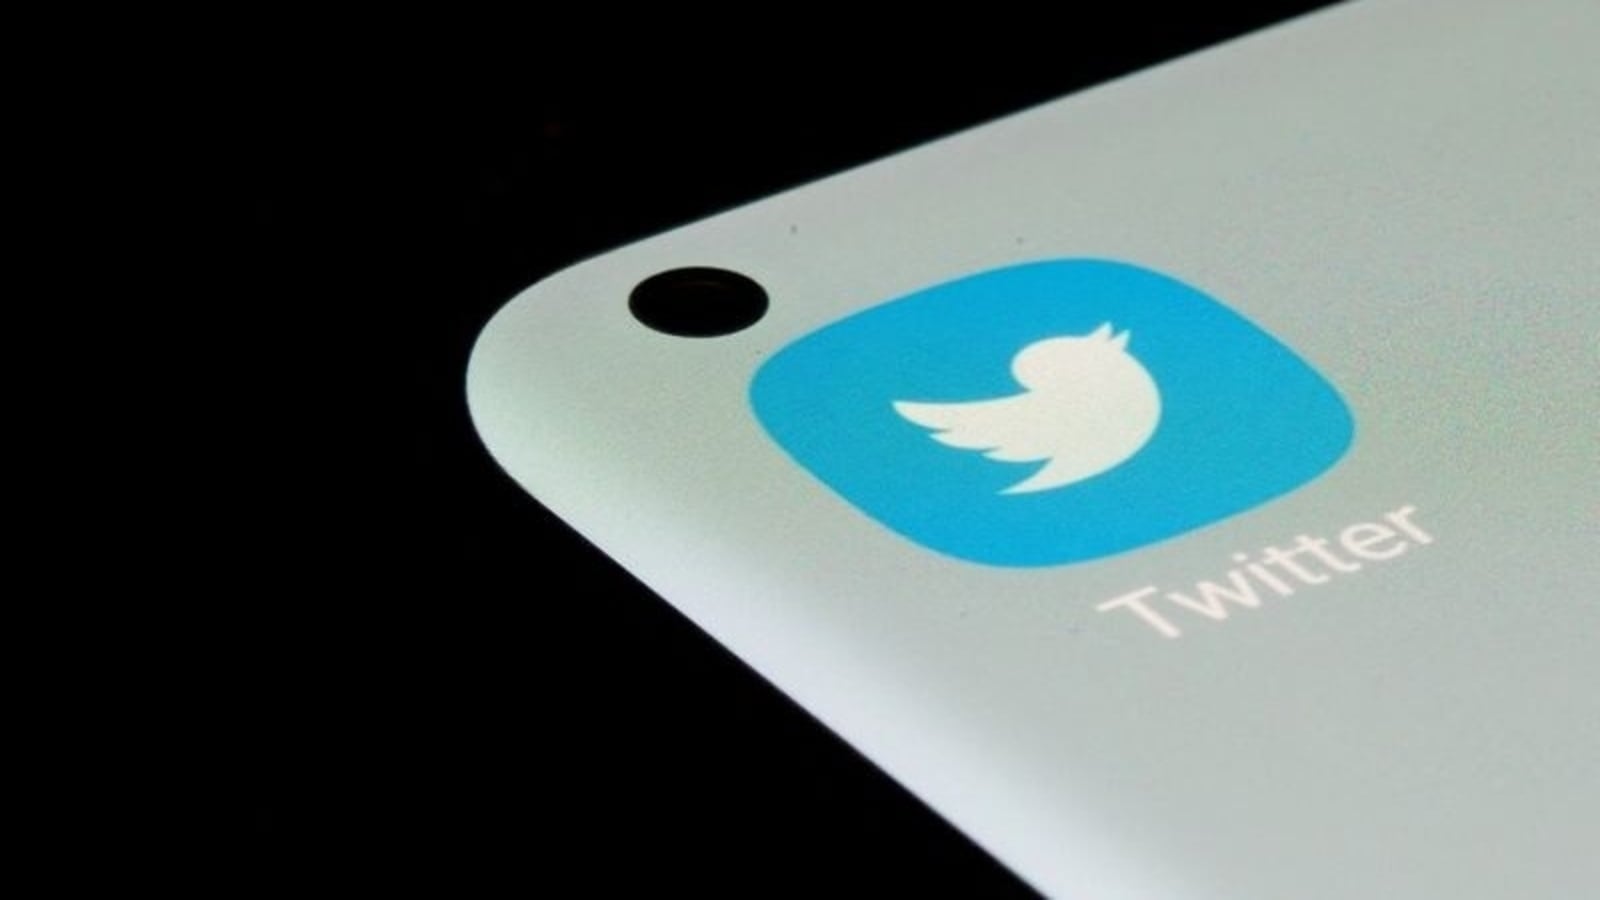 Twitter adds more users than Wall Street expectations